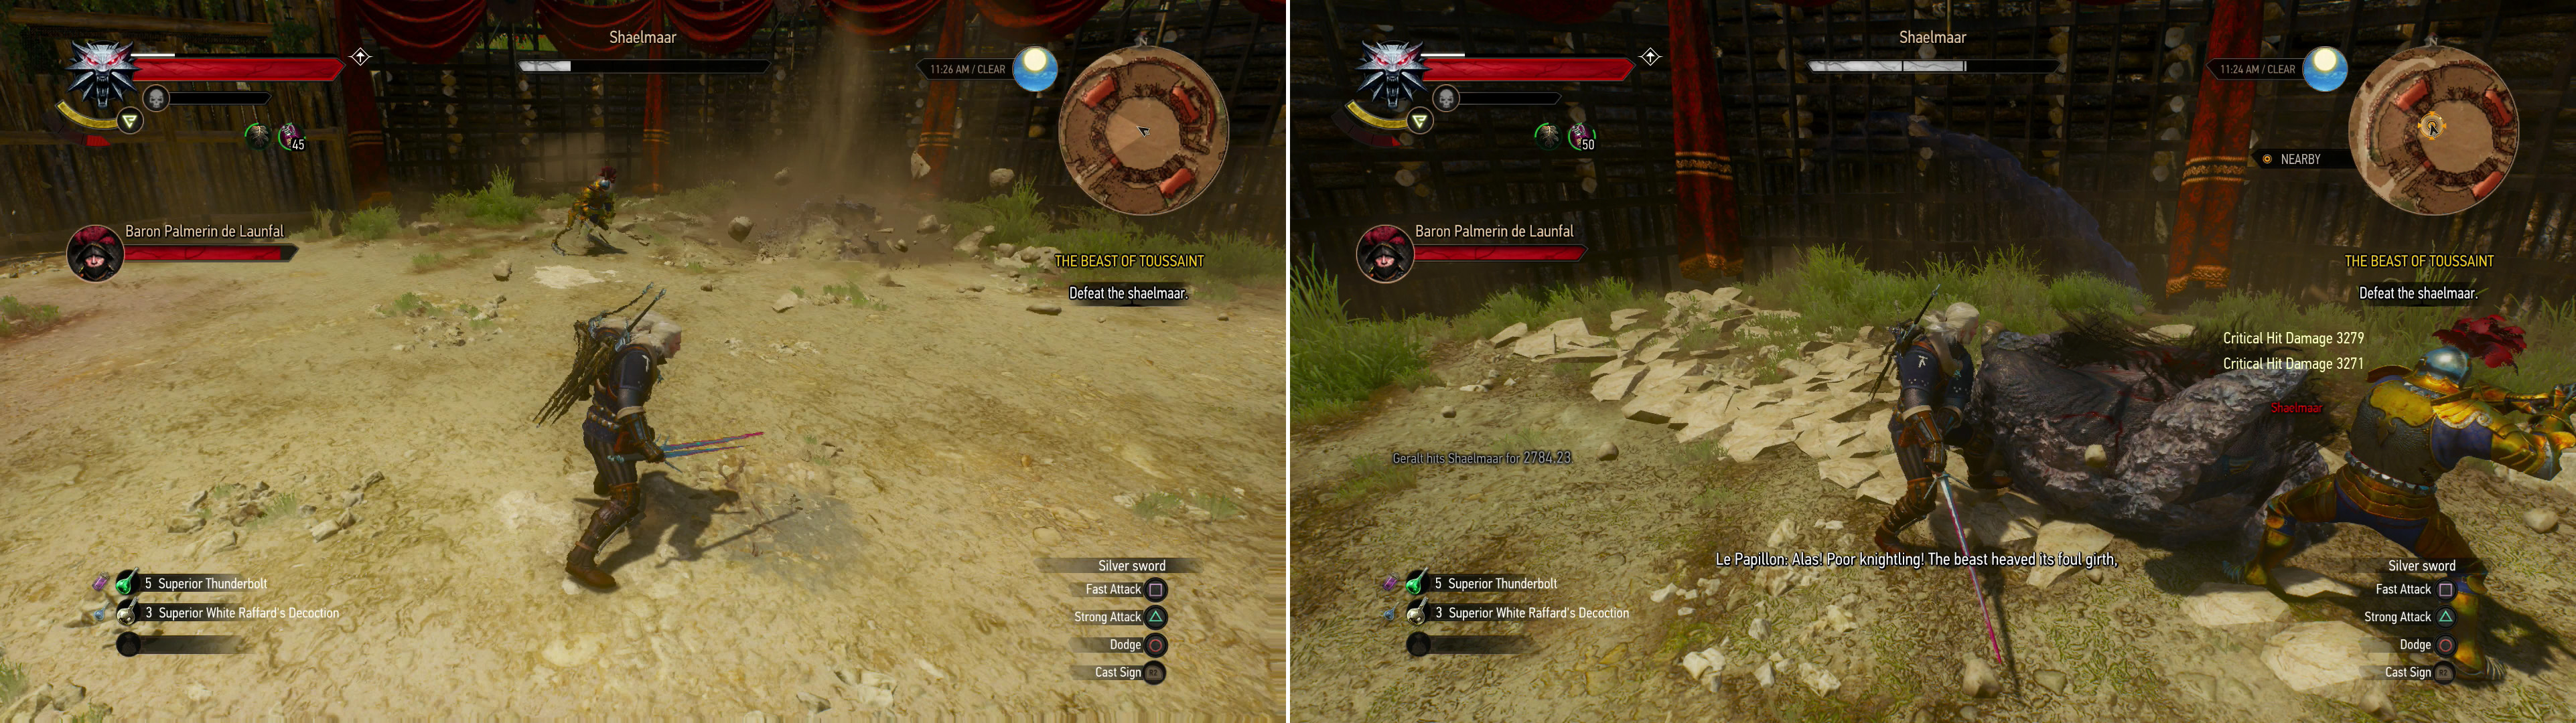 When pressured, the Shaelmaar may burrow and spin, dealing damage to anything nearby (left). Stand near the arena walls and dodge when it charges you. The resulting impact will stagger it and leave it vulnerable (right).